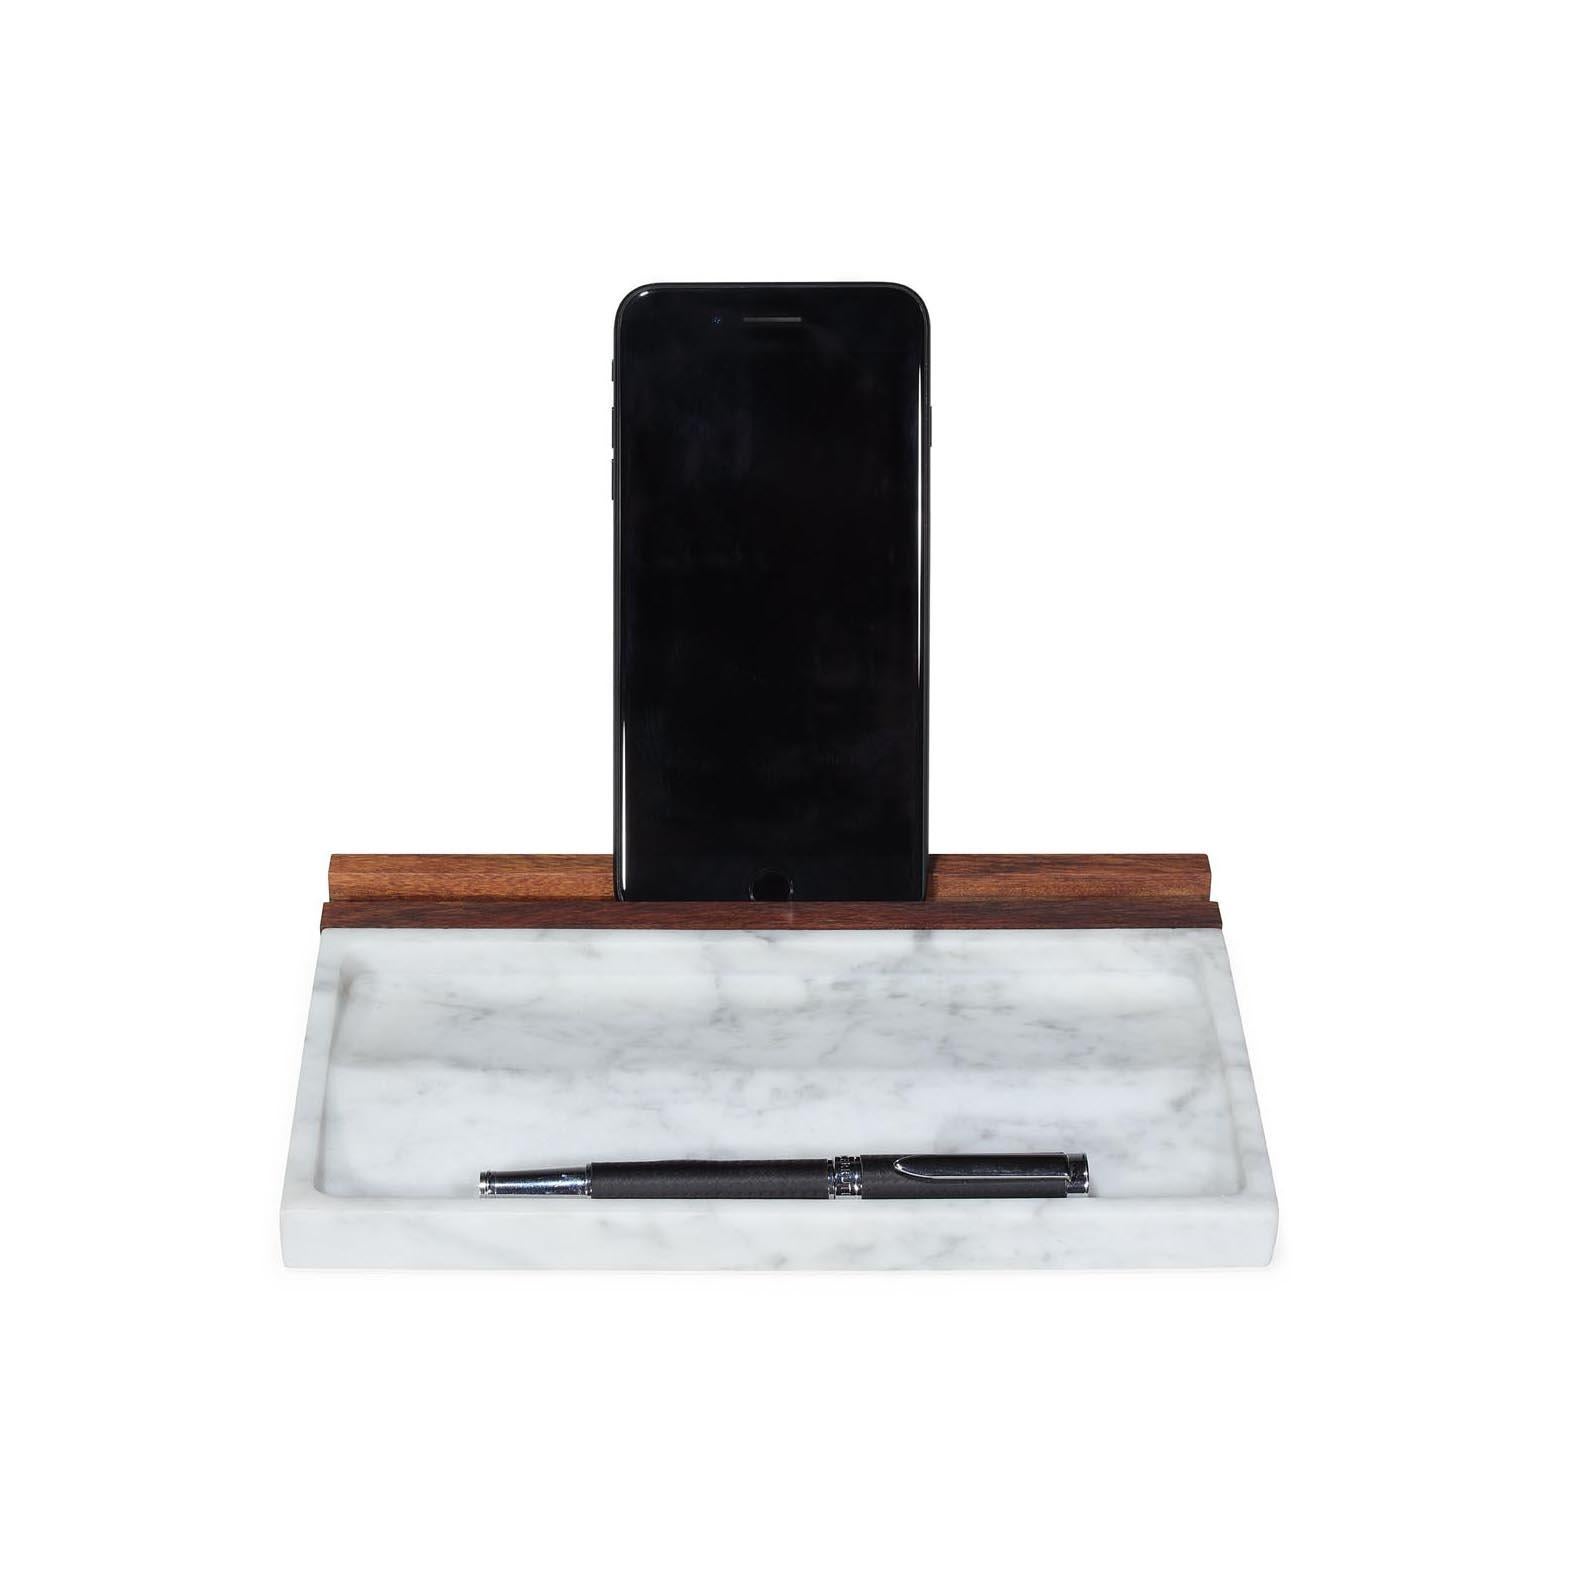 Hand-Crafted Tech Tray - Office tray - Carrara Marble + Walnut For Sale